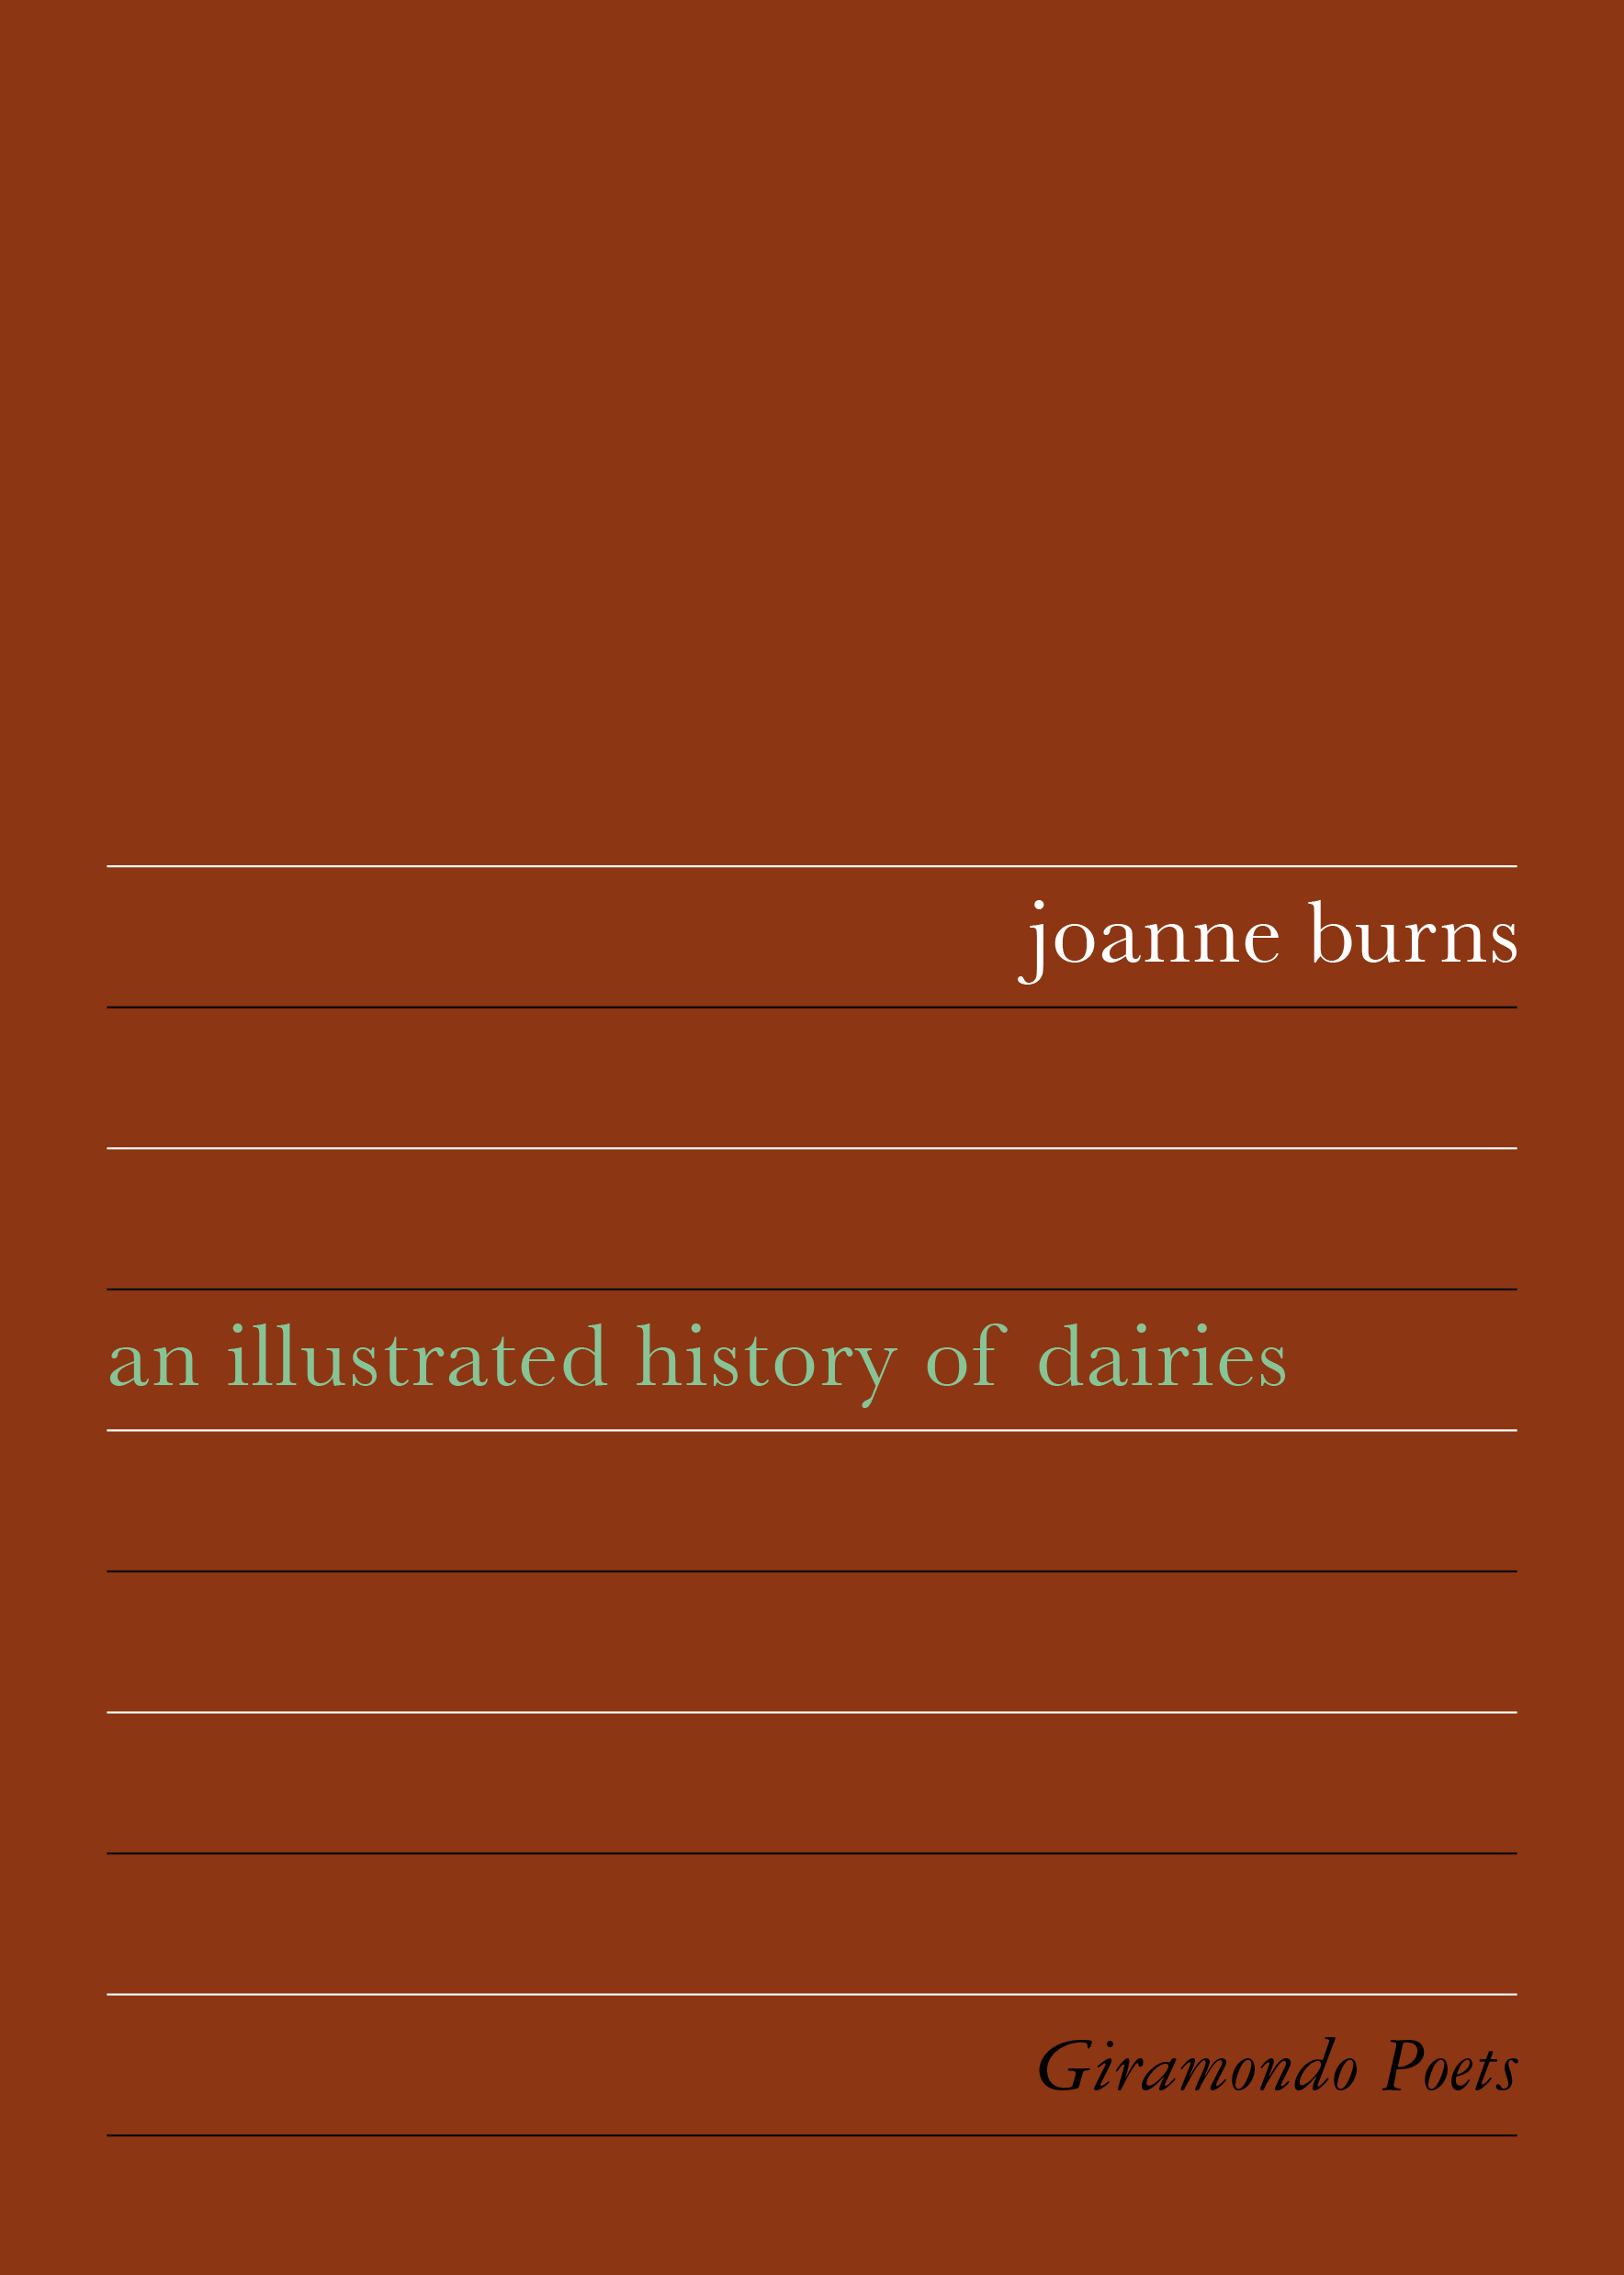 An illustrated history of dairies